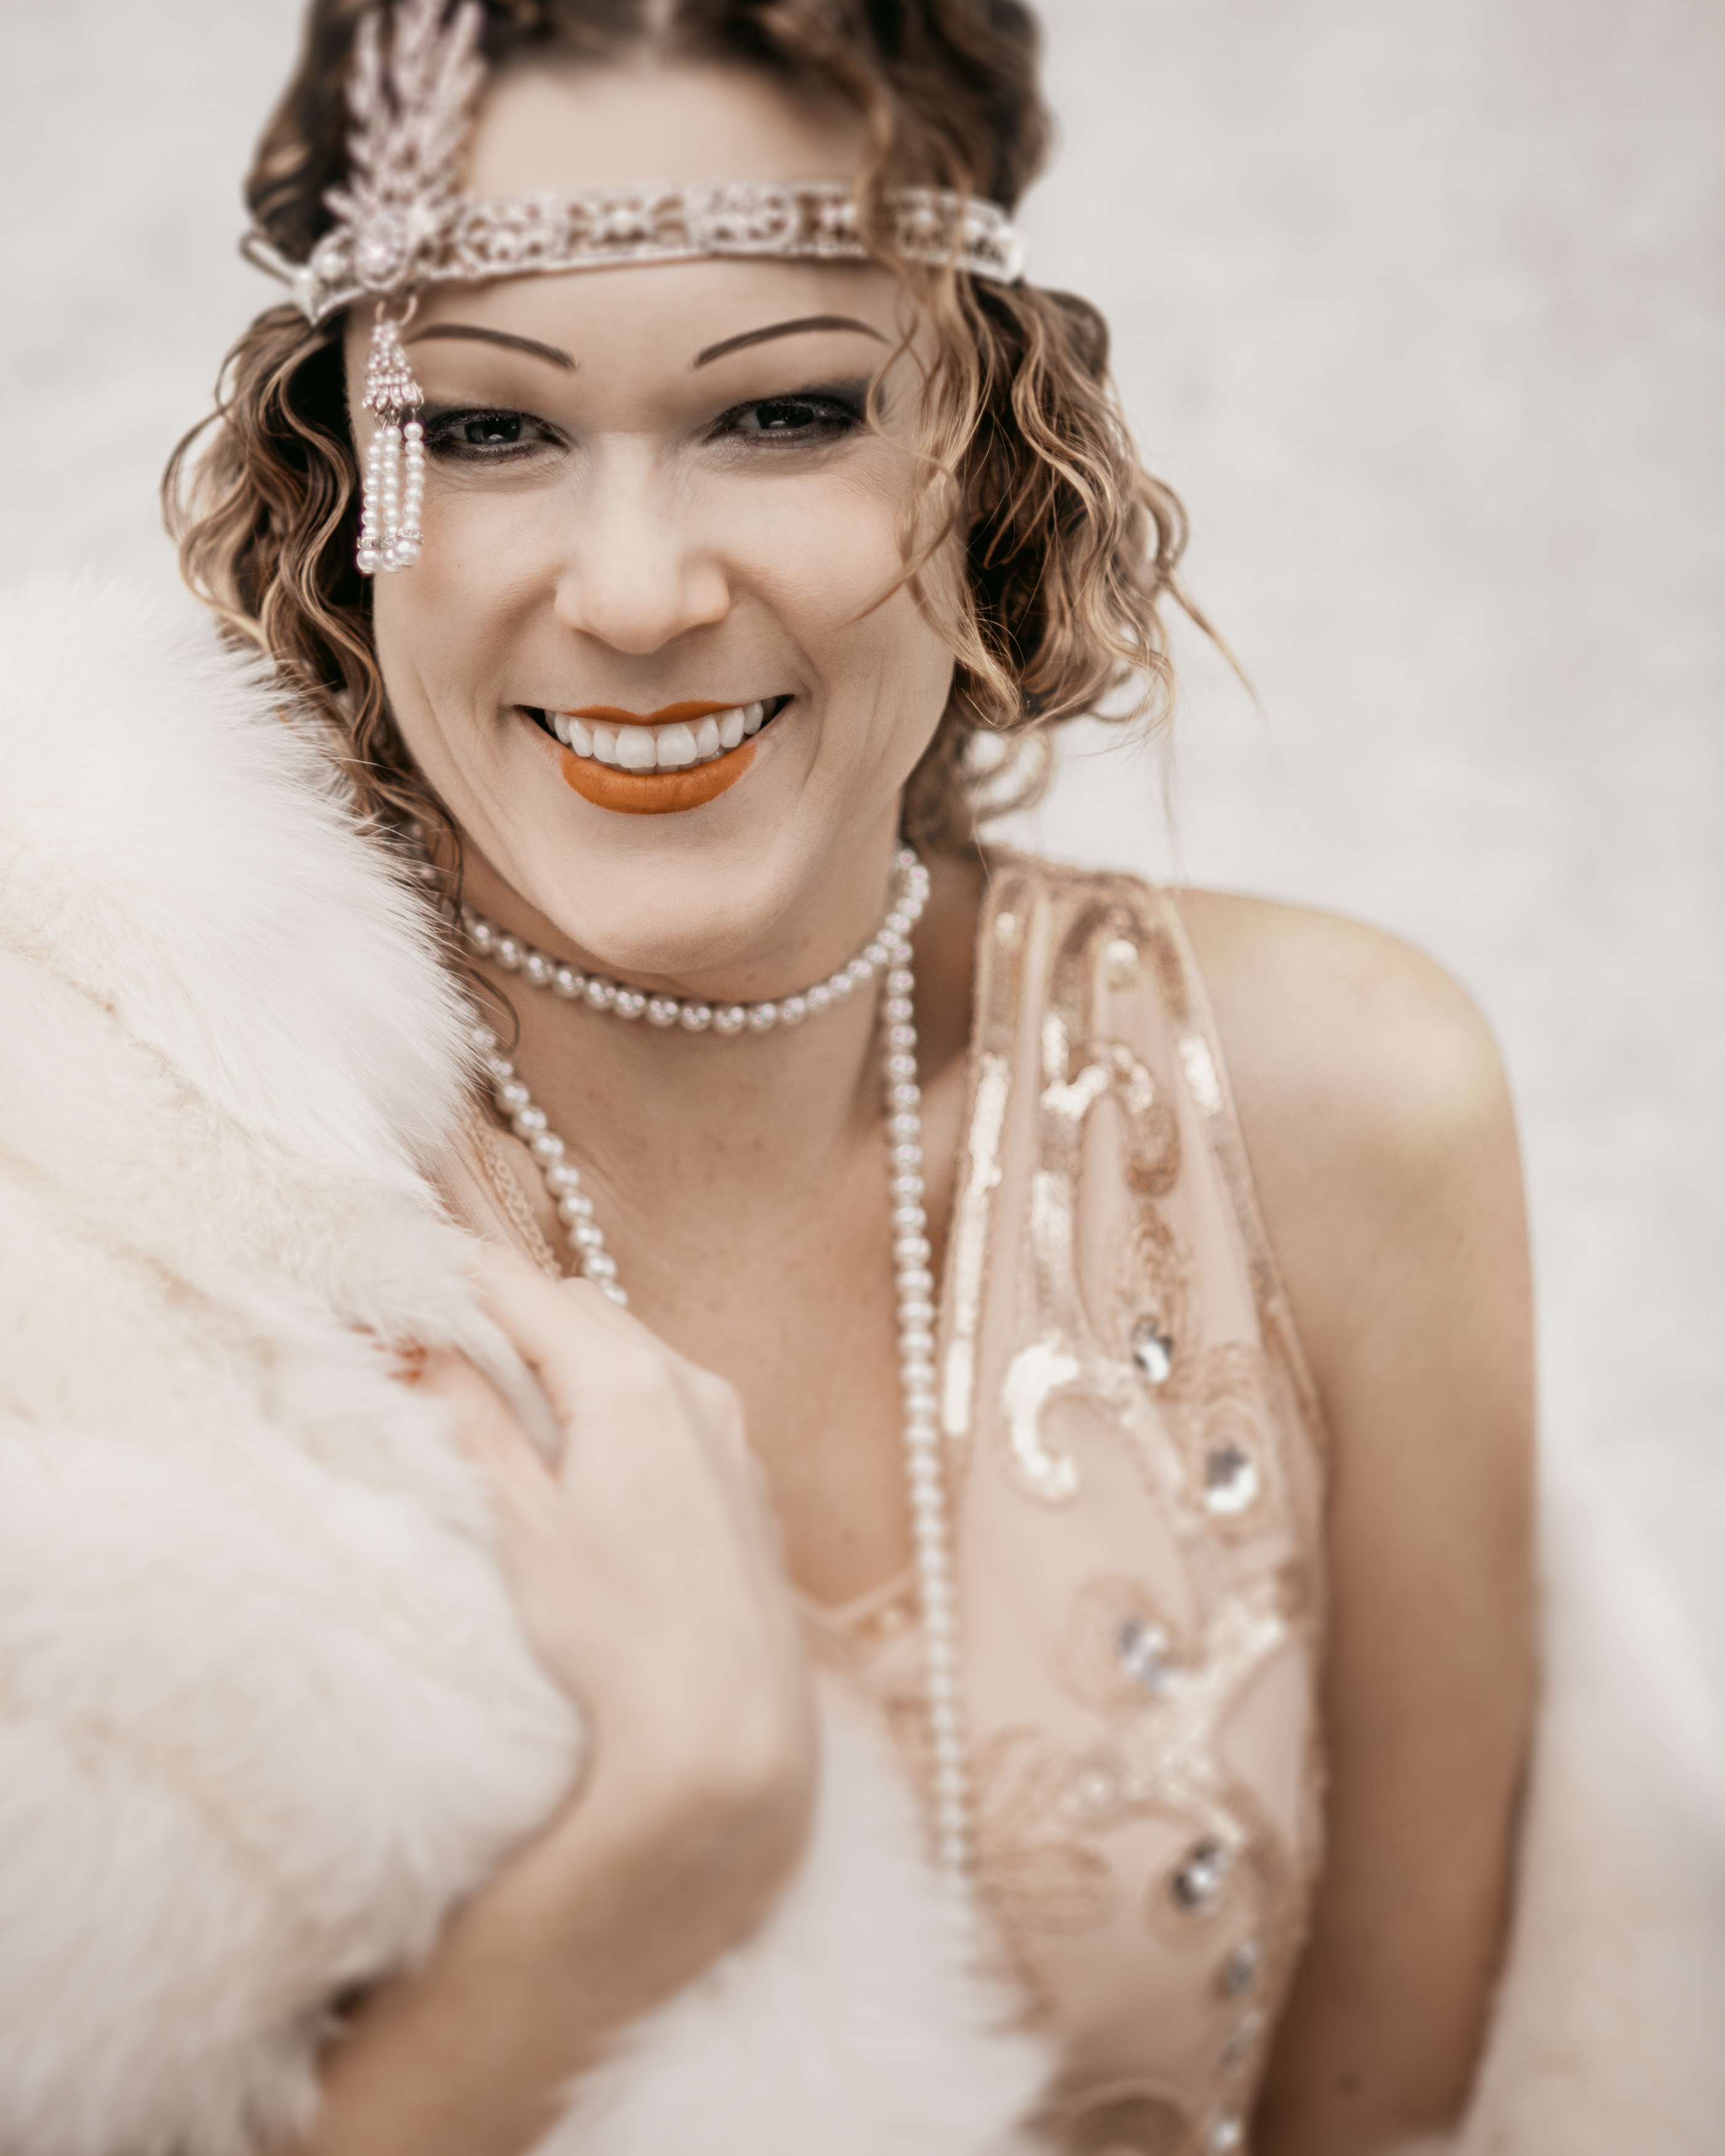 The Last Flapper Catherine DuBord smiling